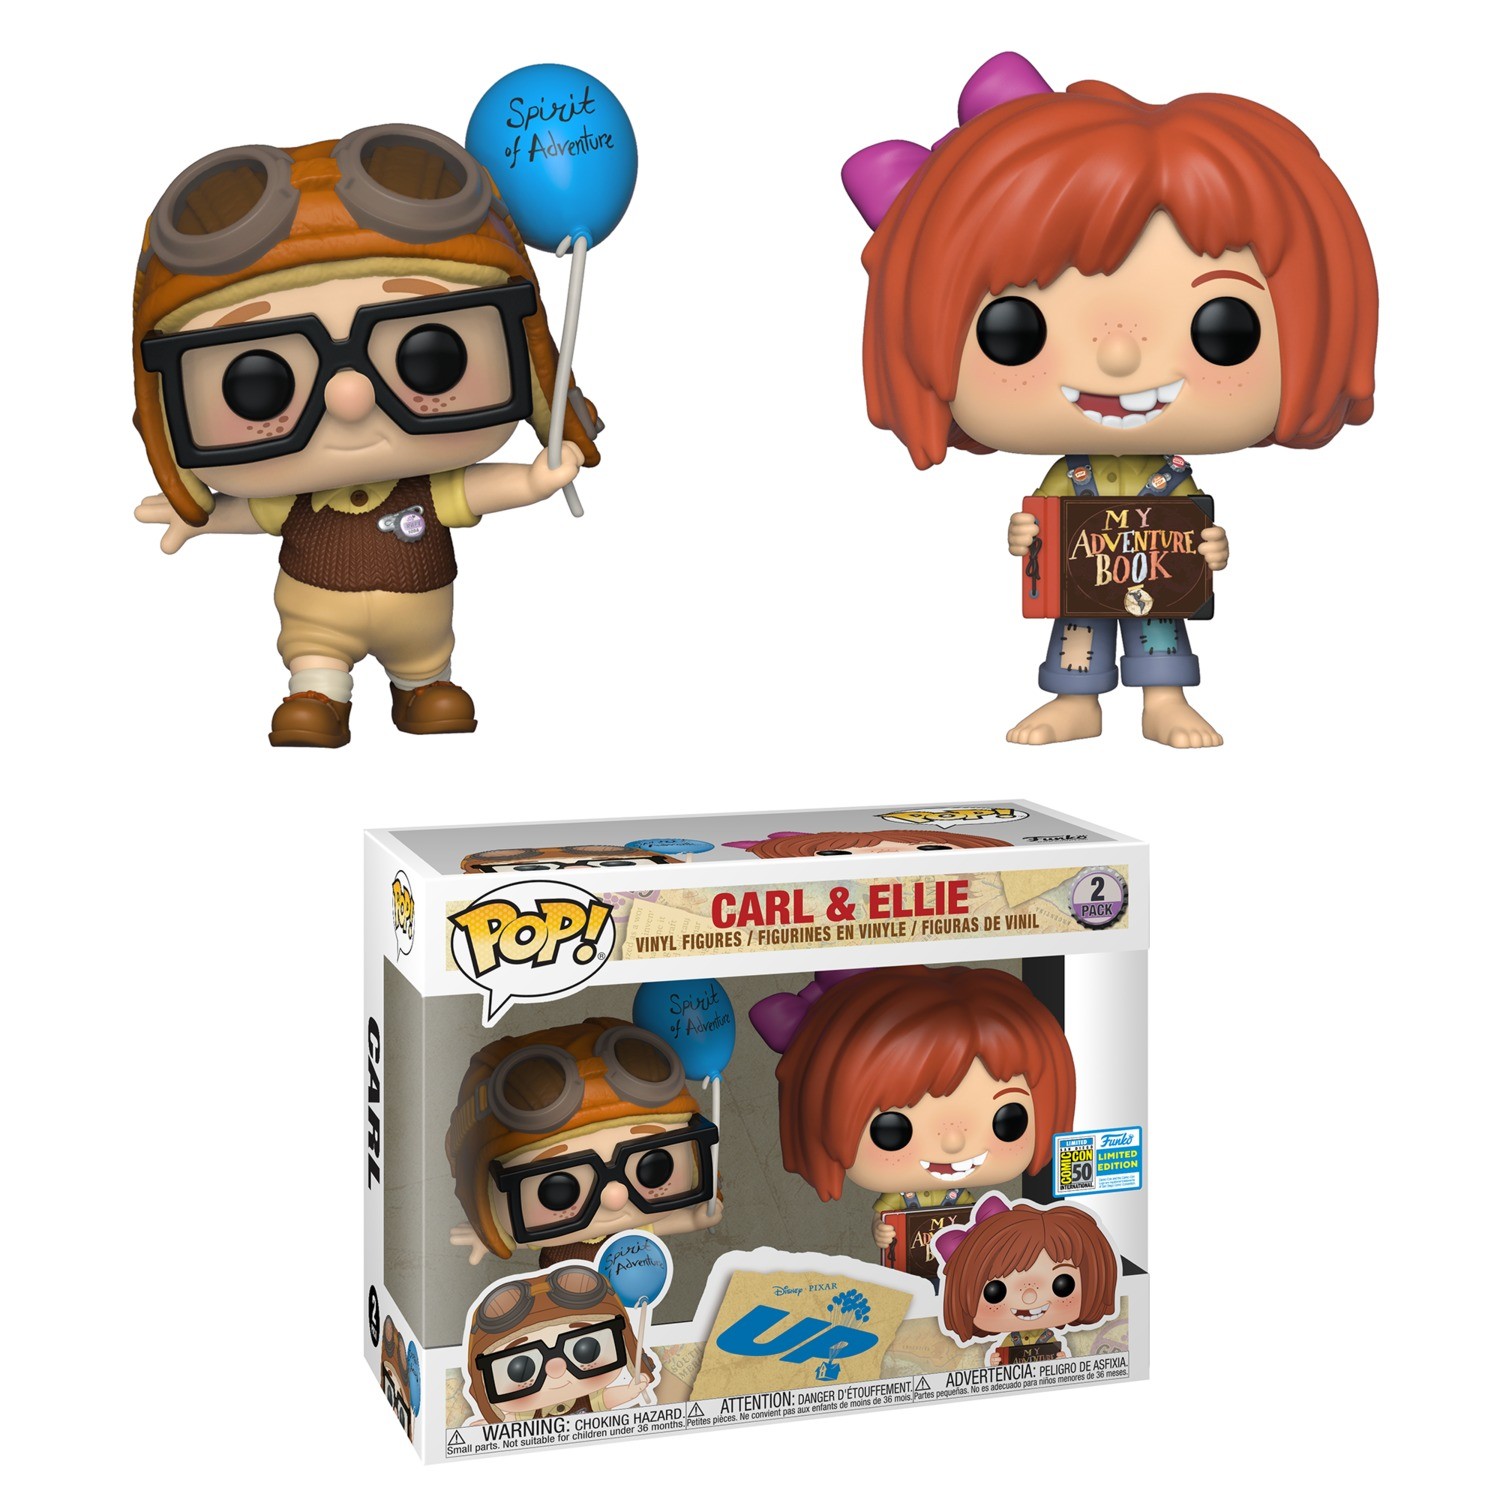 russell up funko pop